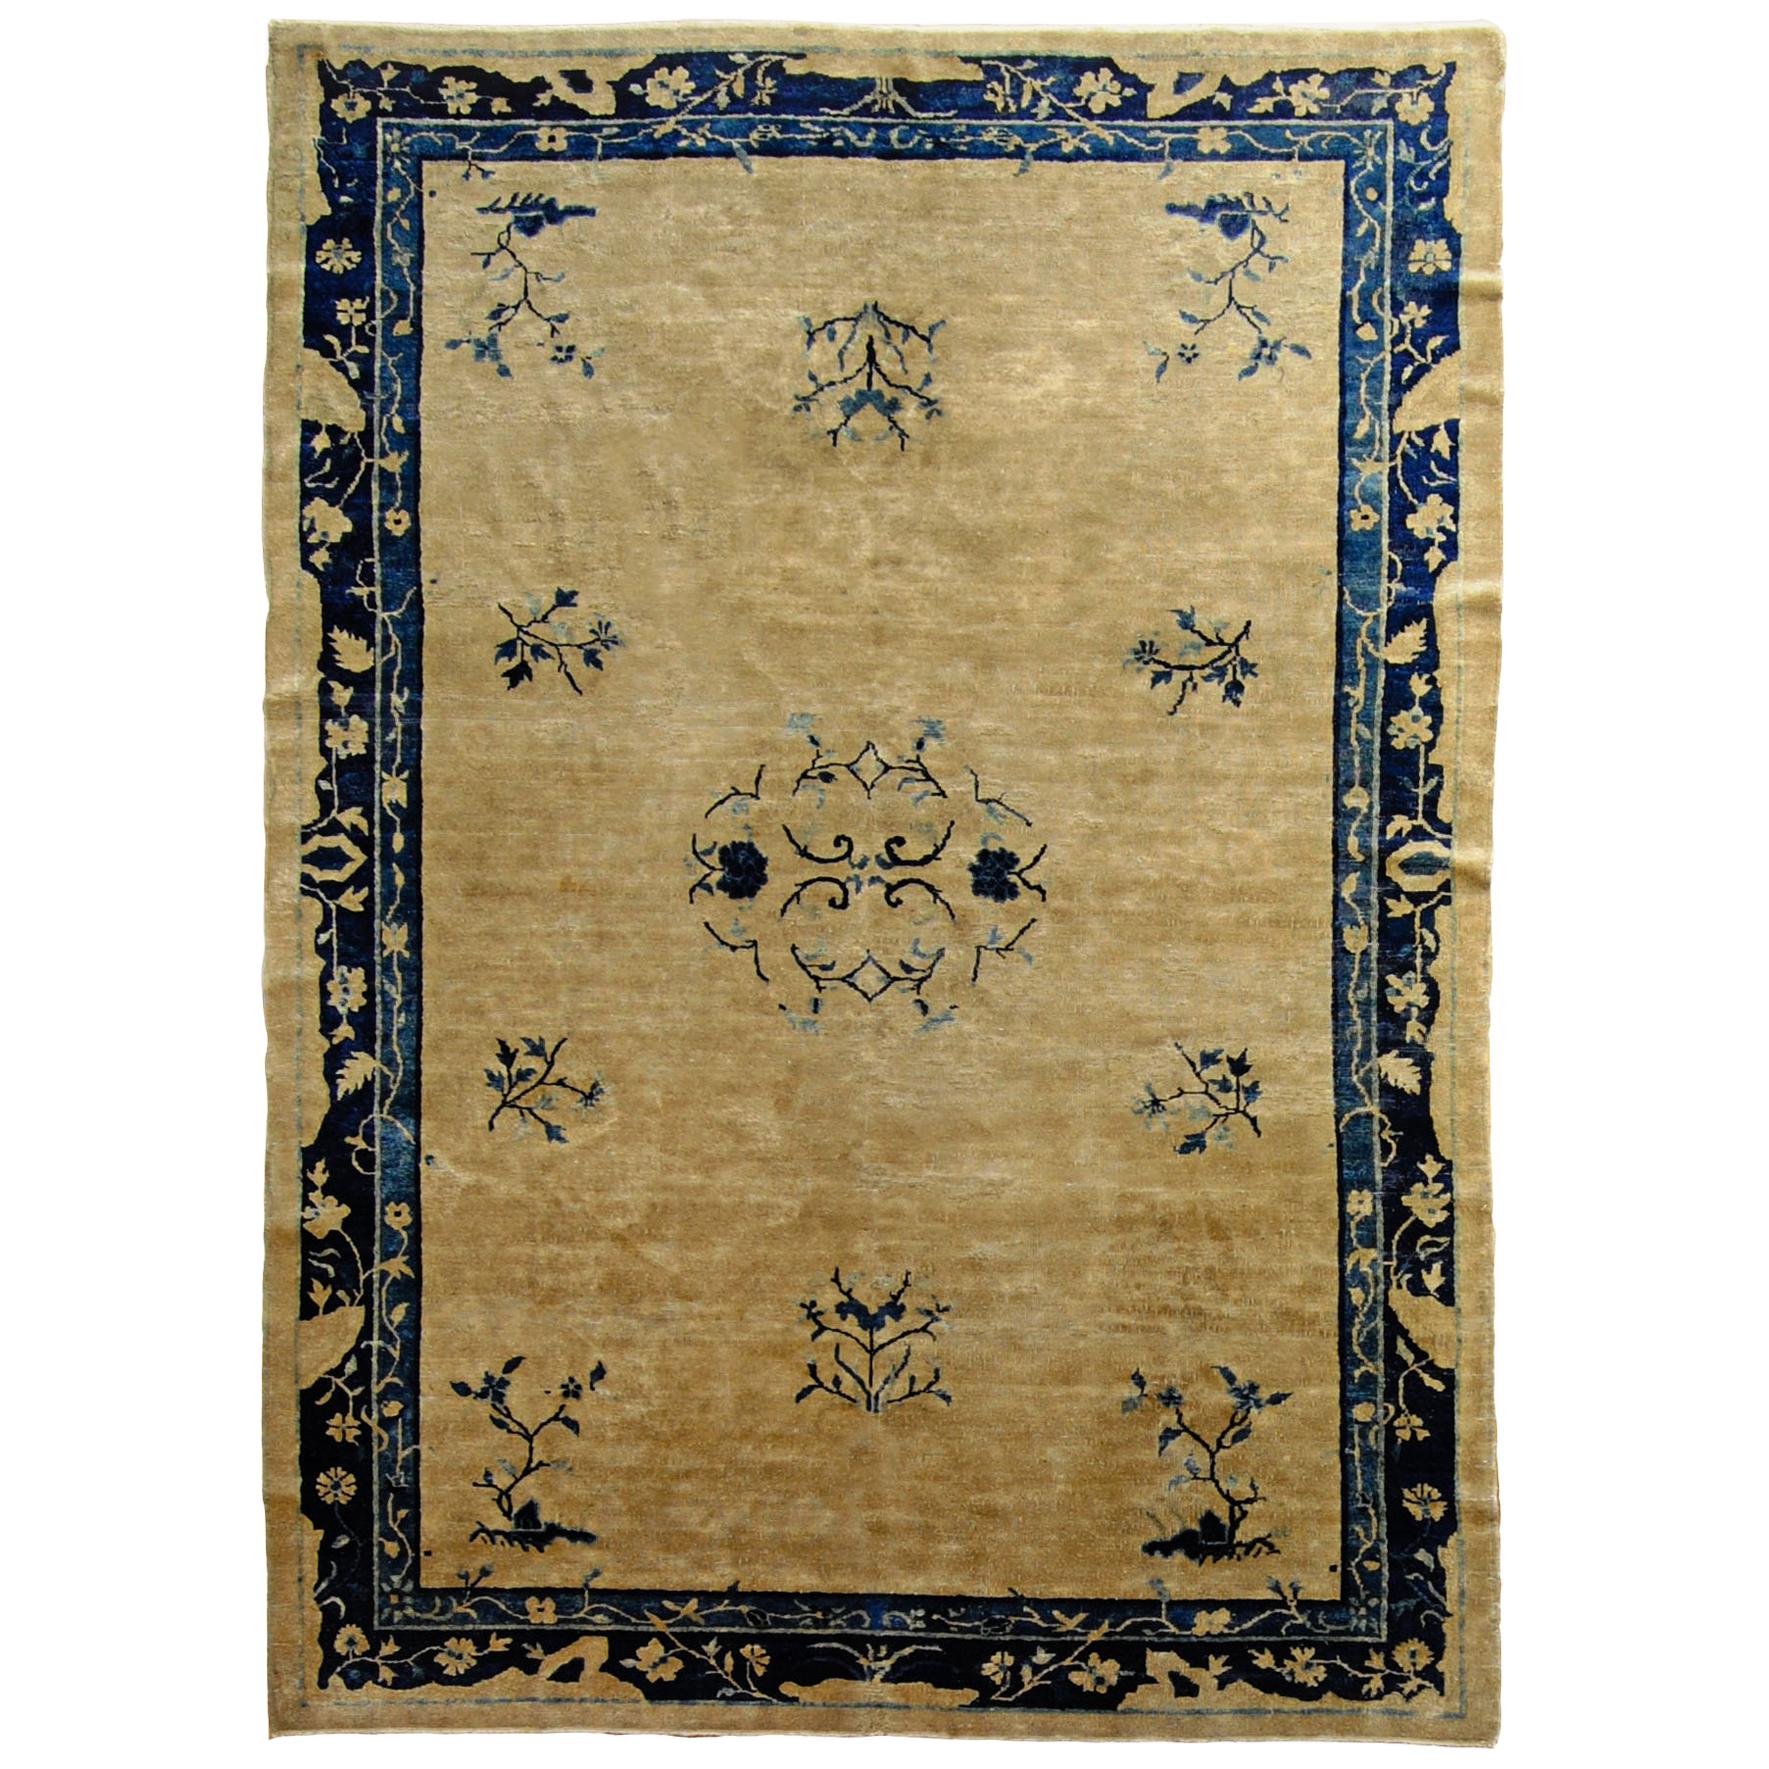 19th Century Peking Hand-Knotted White and Blu Luxury Decoration Rug For Sale